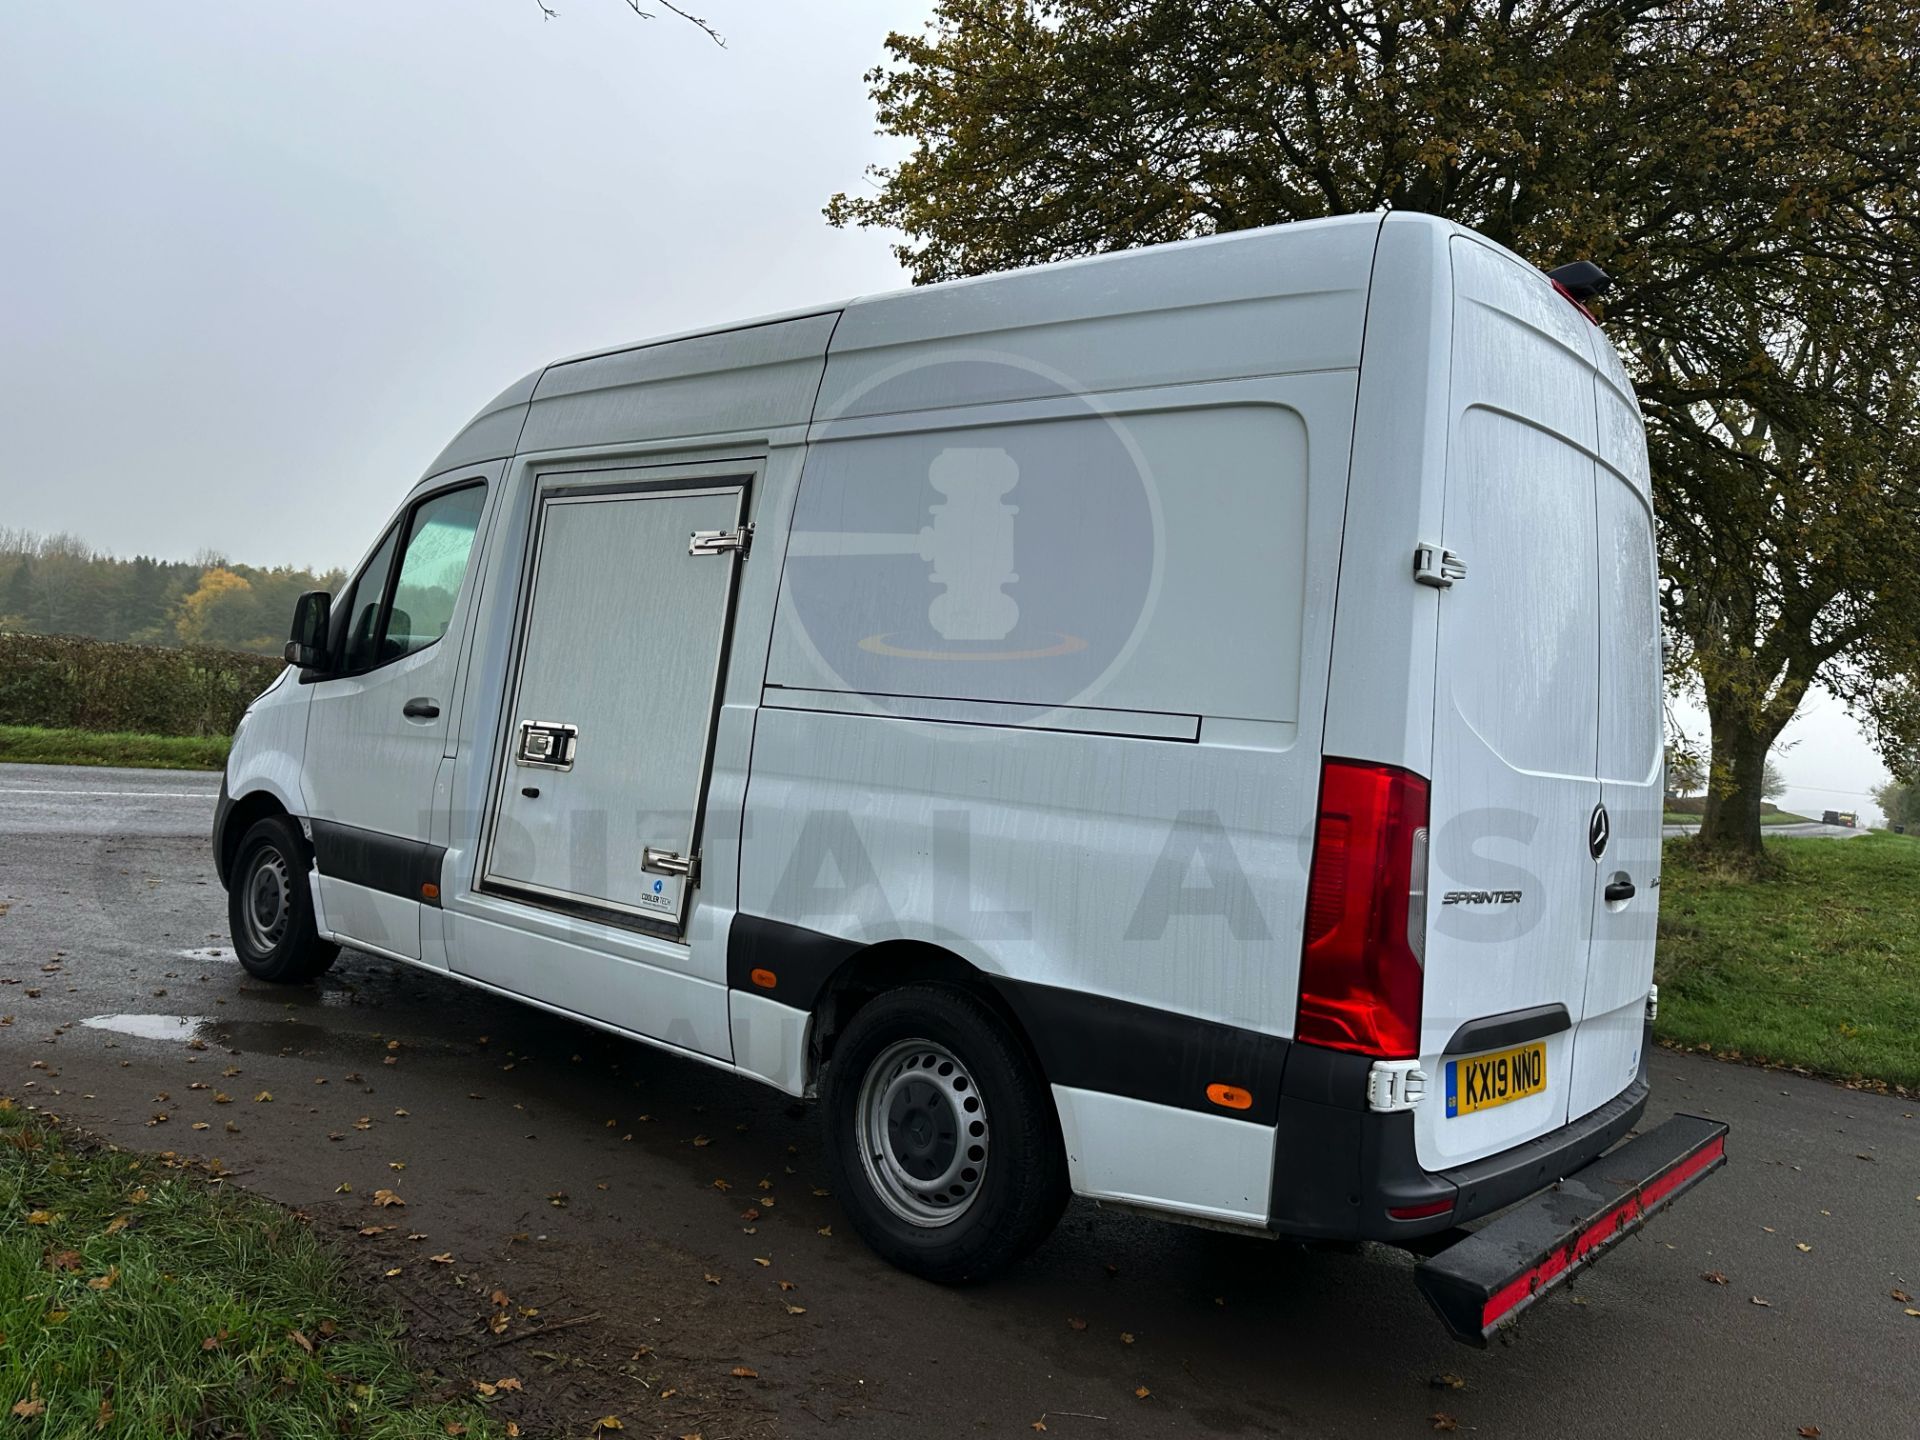 MERCEDES-BENZ SPRINTER 314 CDI *MWB - REFRIGERATED VAN* (2019 - FACELIFT MODEL) *OVERNIGHT STANDBY* - Image 12 of 45